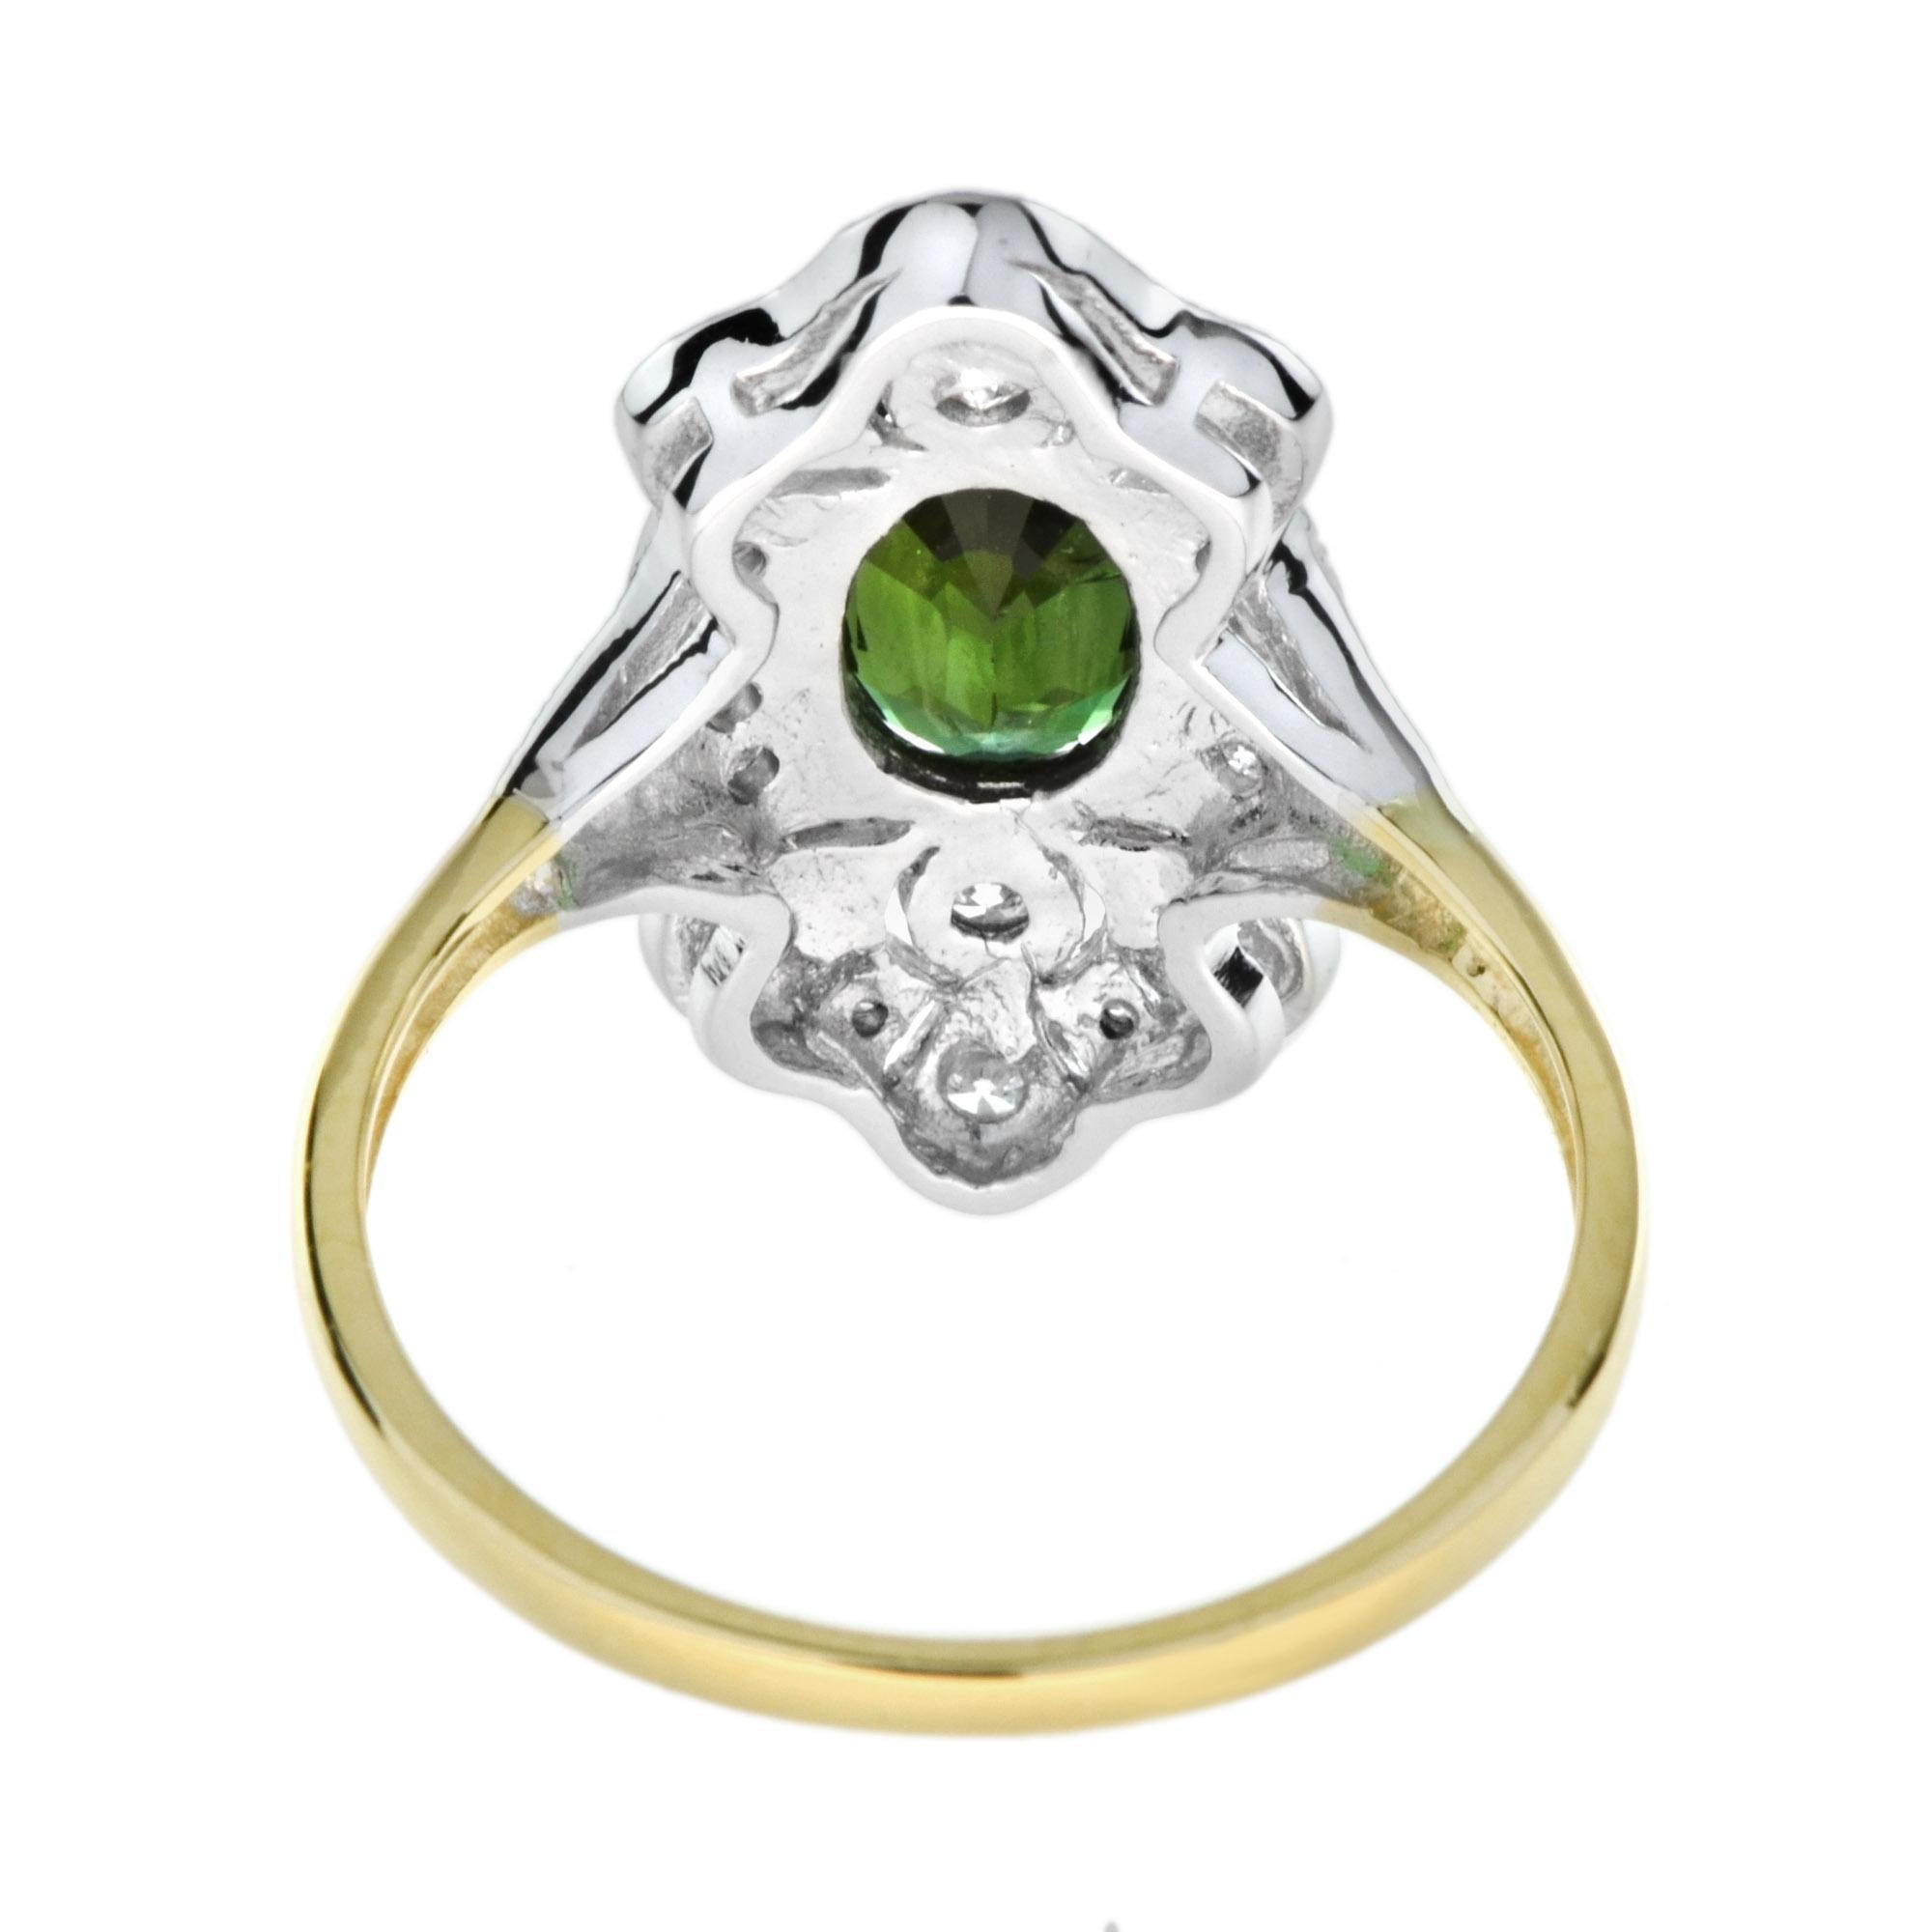 For Sale:  Art Deco Style Oval Green Tourmaline with Diamond Halo Ring in 18K Yellow Gold 5